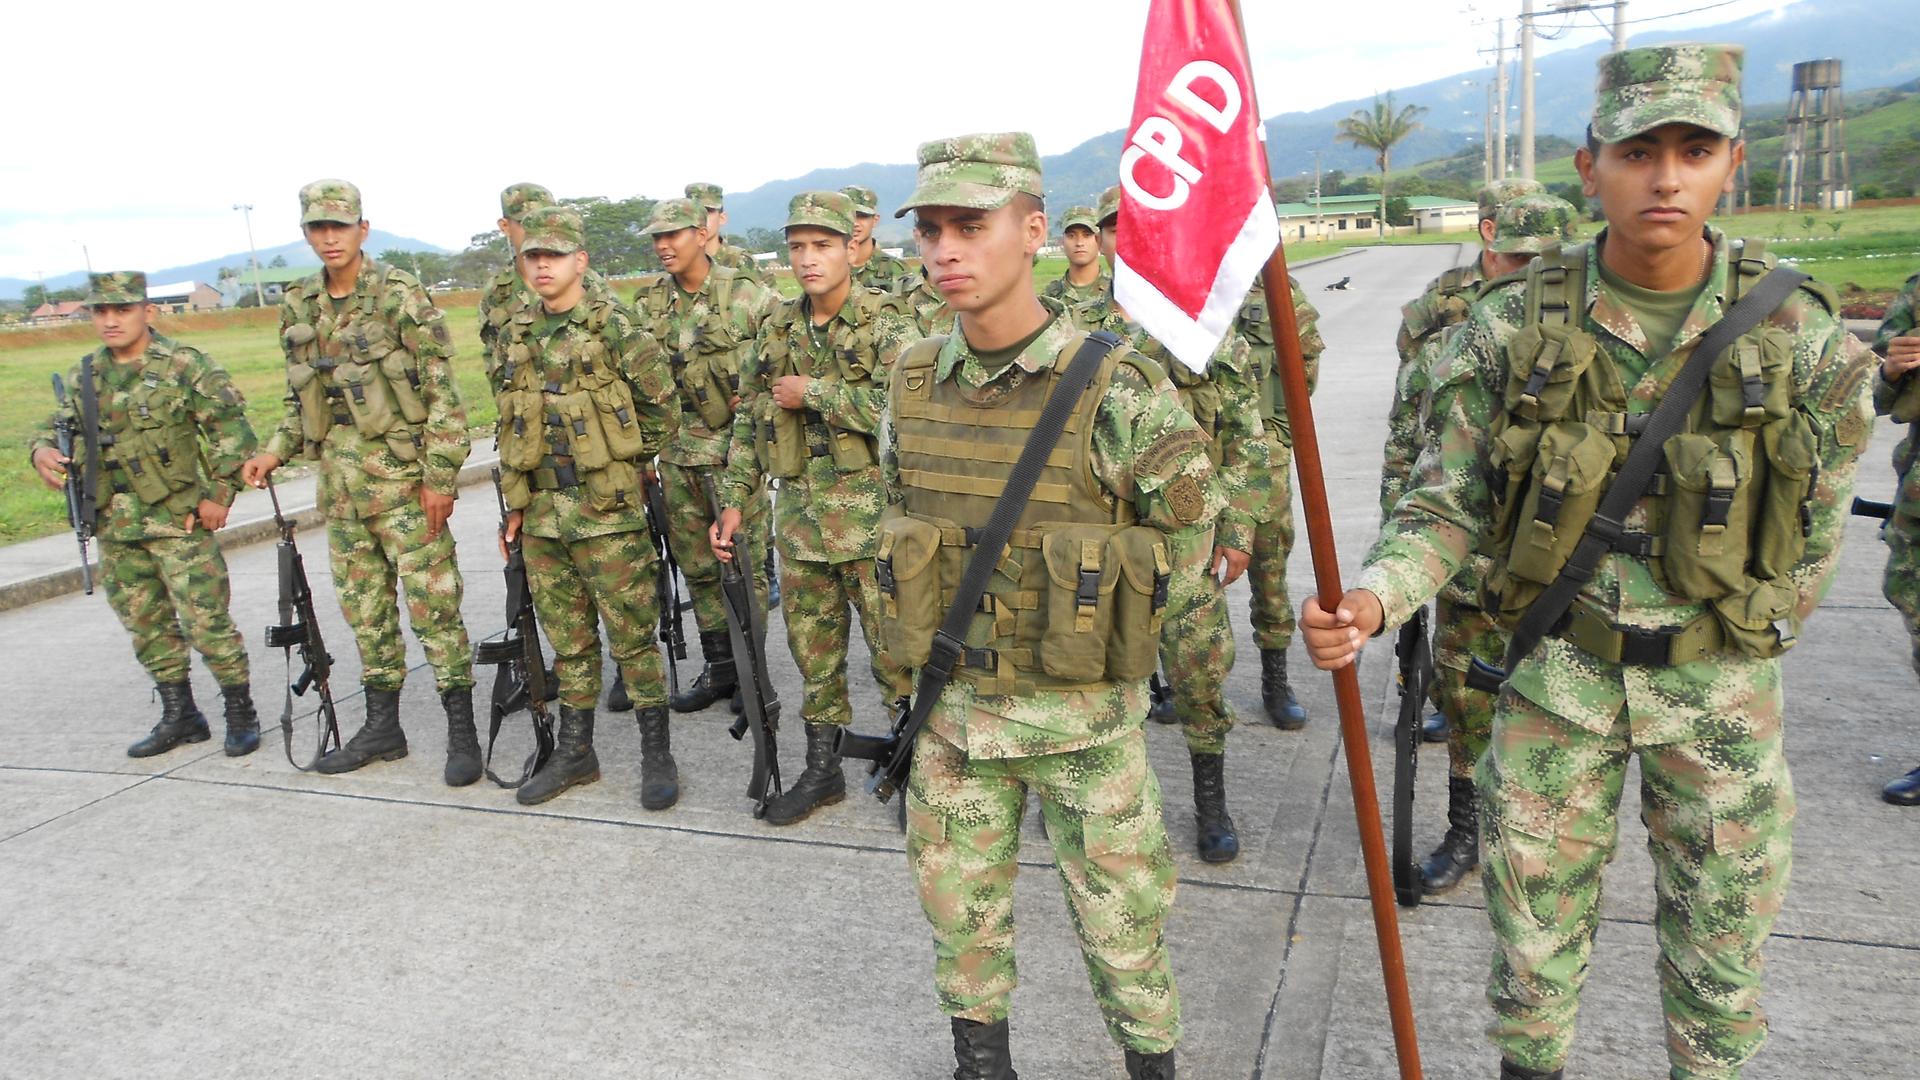 Young Colombian army troops in the southern town of Uribe, which used to be a FARC stronghold. Some are draftees serving their obligatory 18 months service; others are professional soldiers. Most come from humble backgrounds.